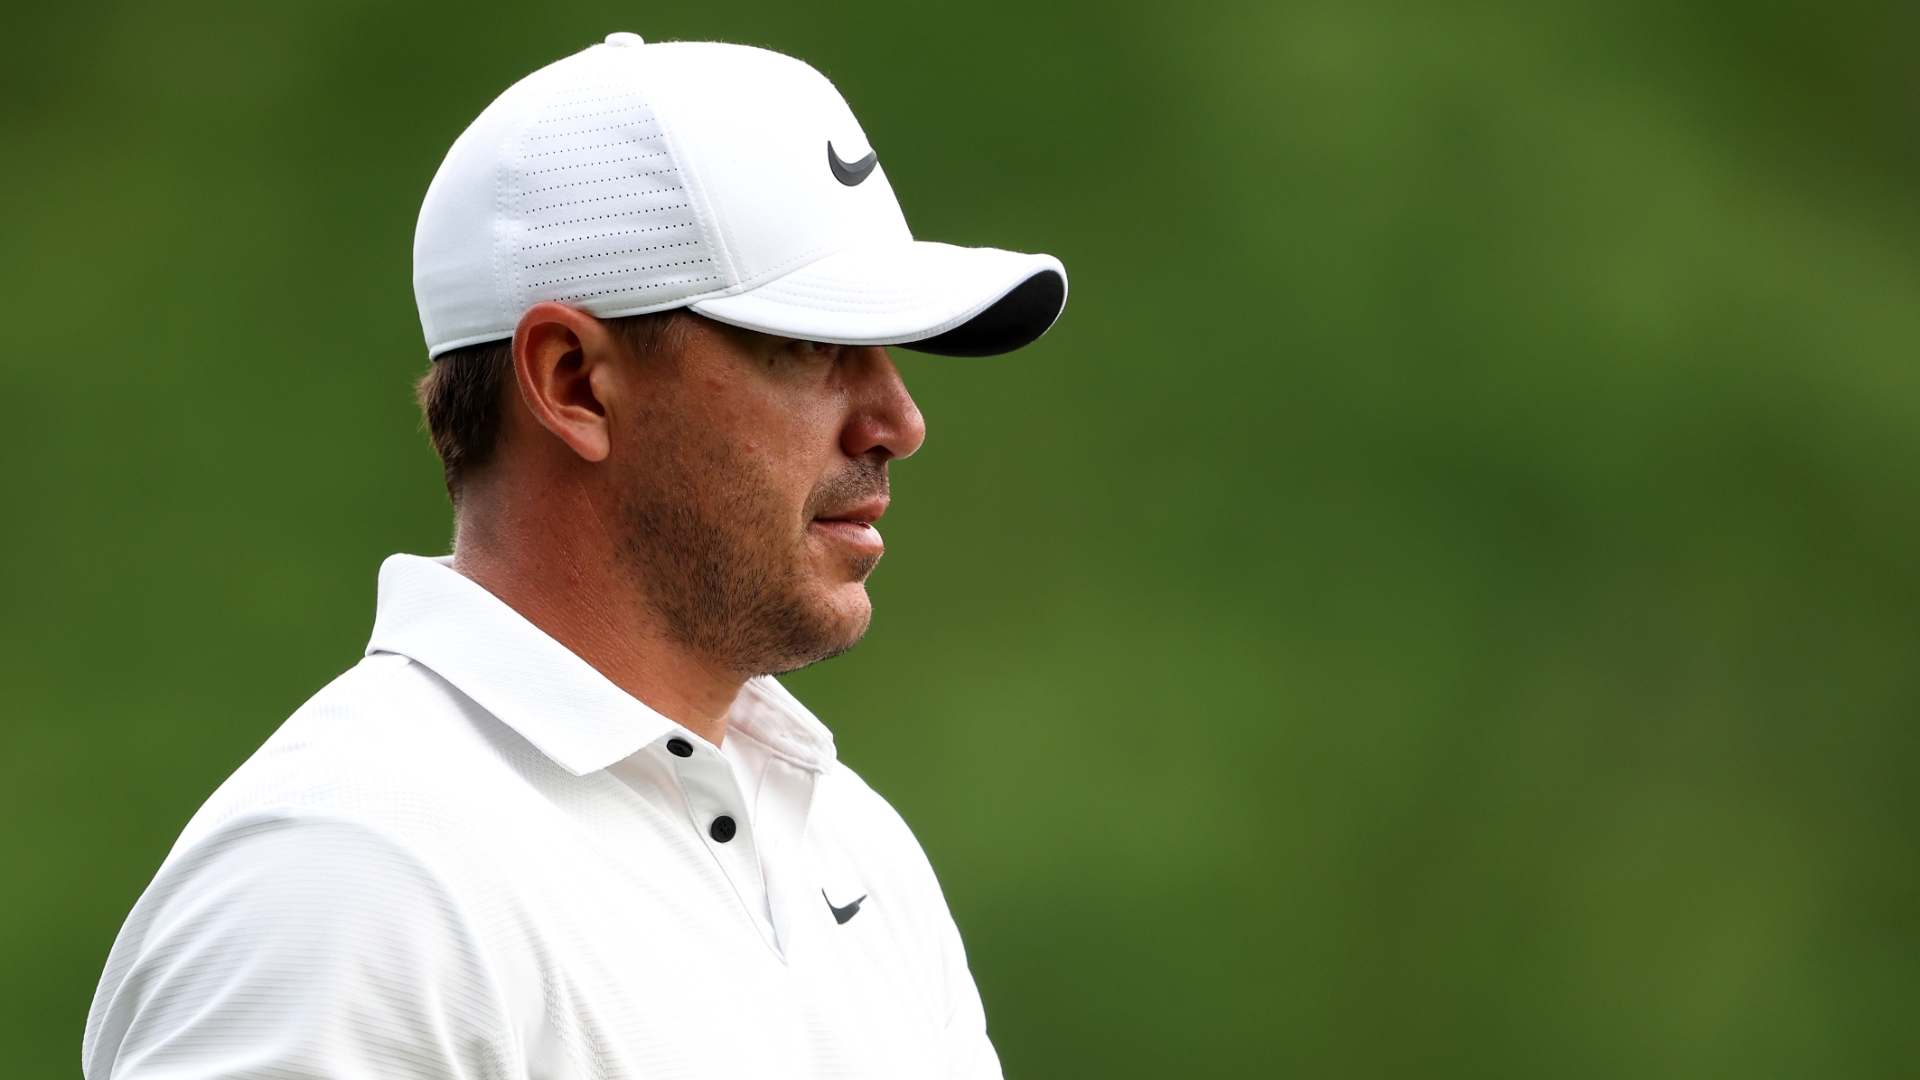 Brooks Koepka extends his lead with eagle on 8